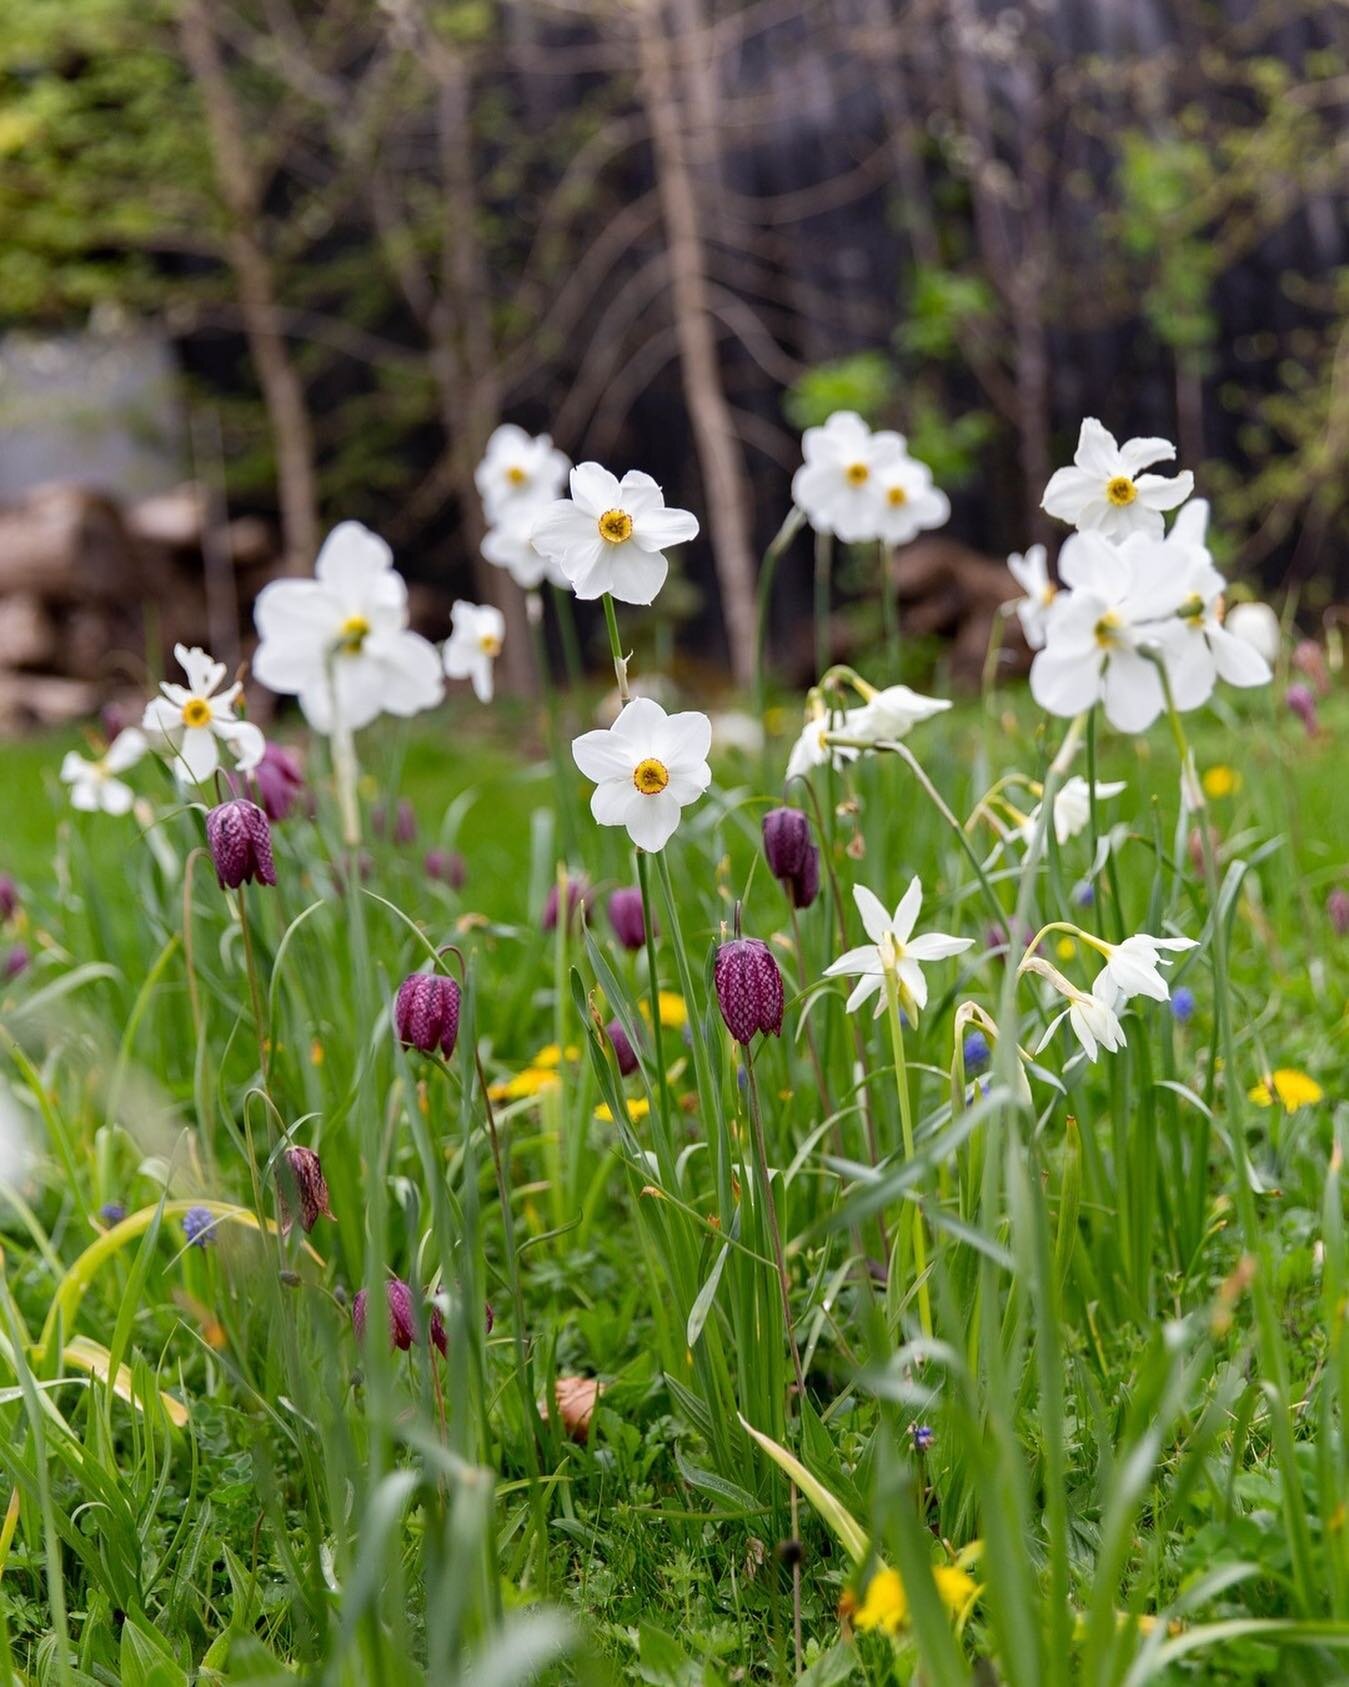 Despite being squashed by the unexpected snow at the start of last week, our bulb meadow is flourishing this year. The daffodils were the most knocked by the sudden snowfall, but have all perked back to life, and look especially good right now mixed 